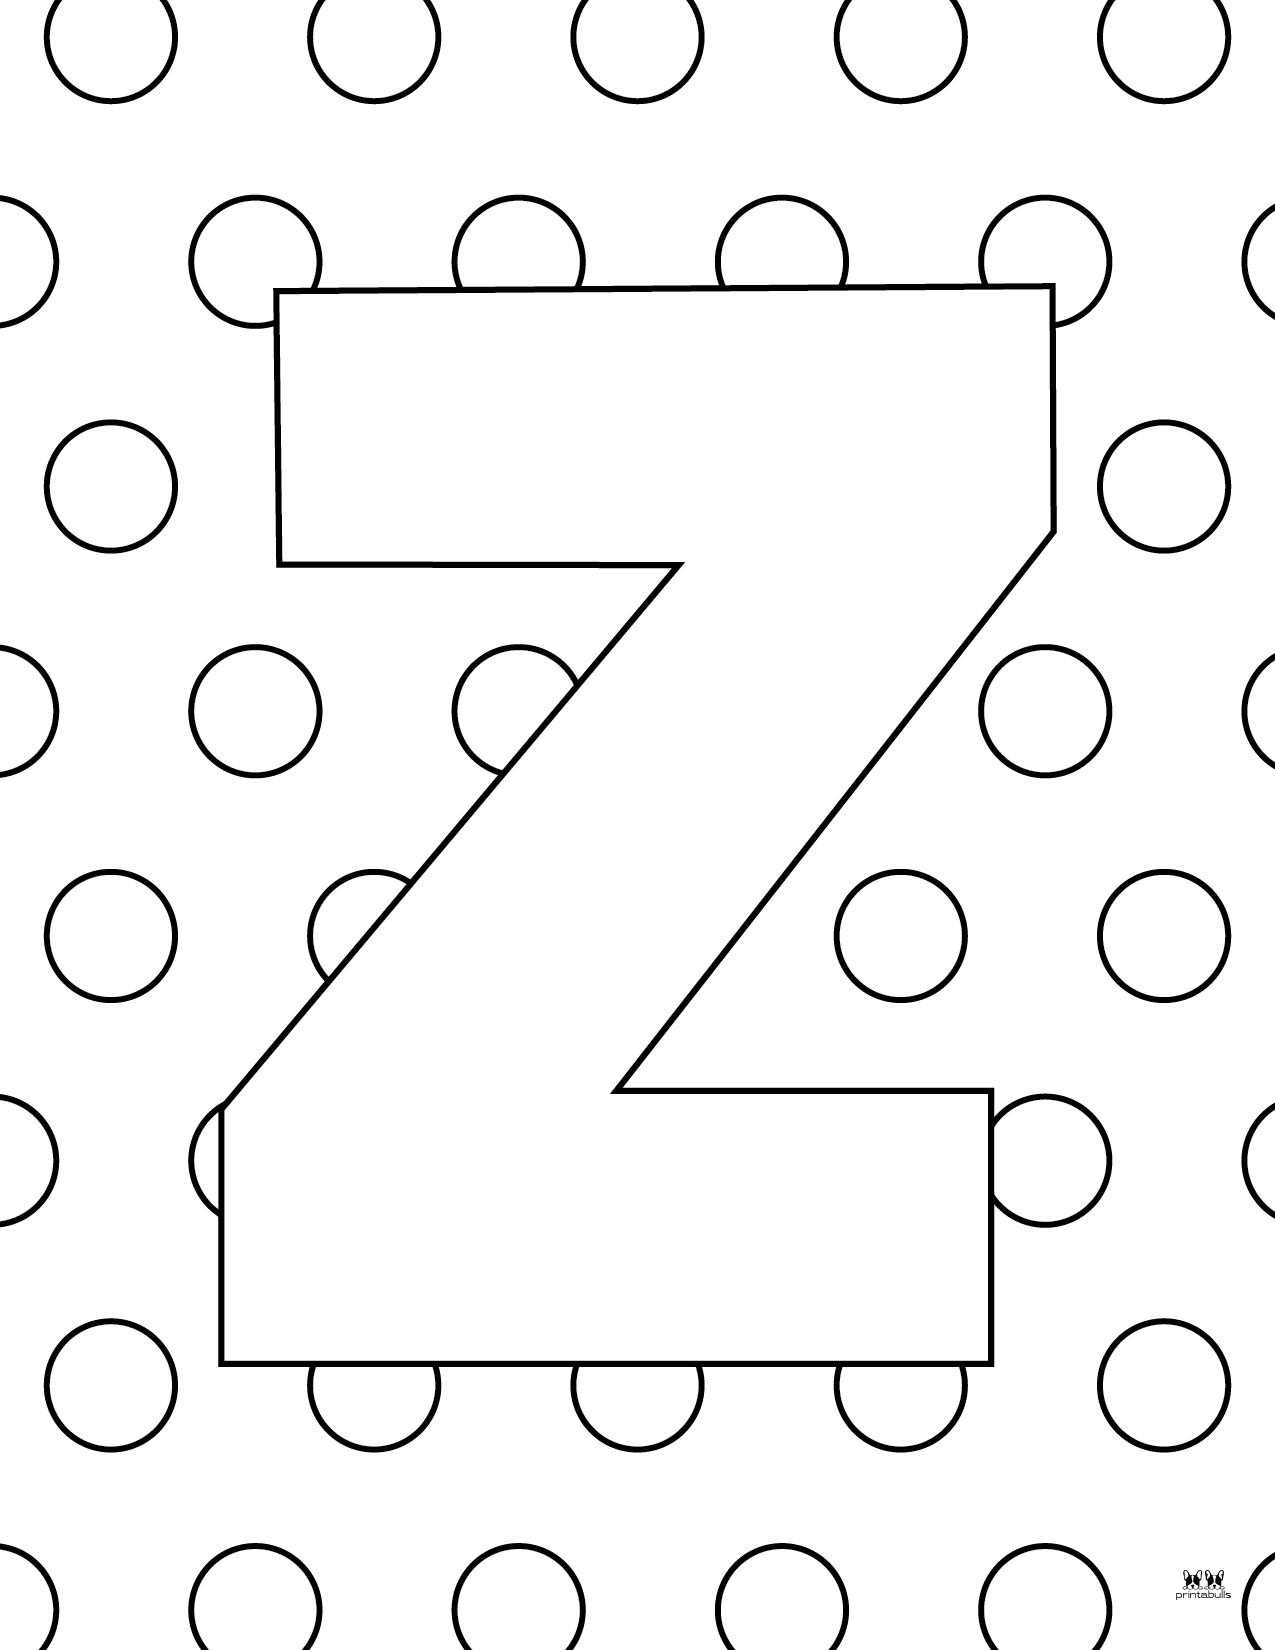 letter-z-coloring-pages-15-free-pages-printabulk